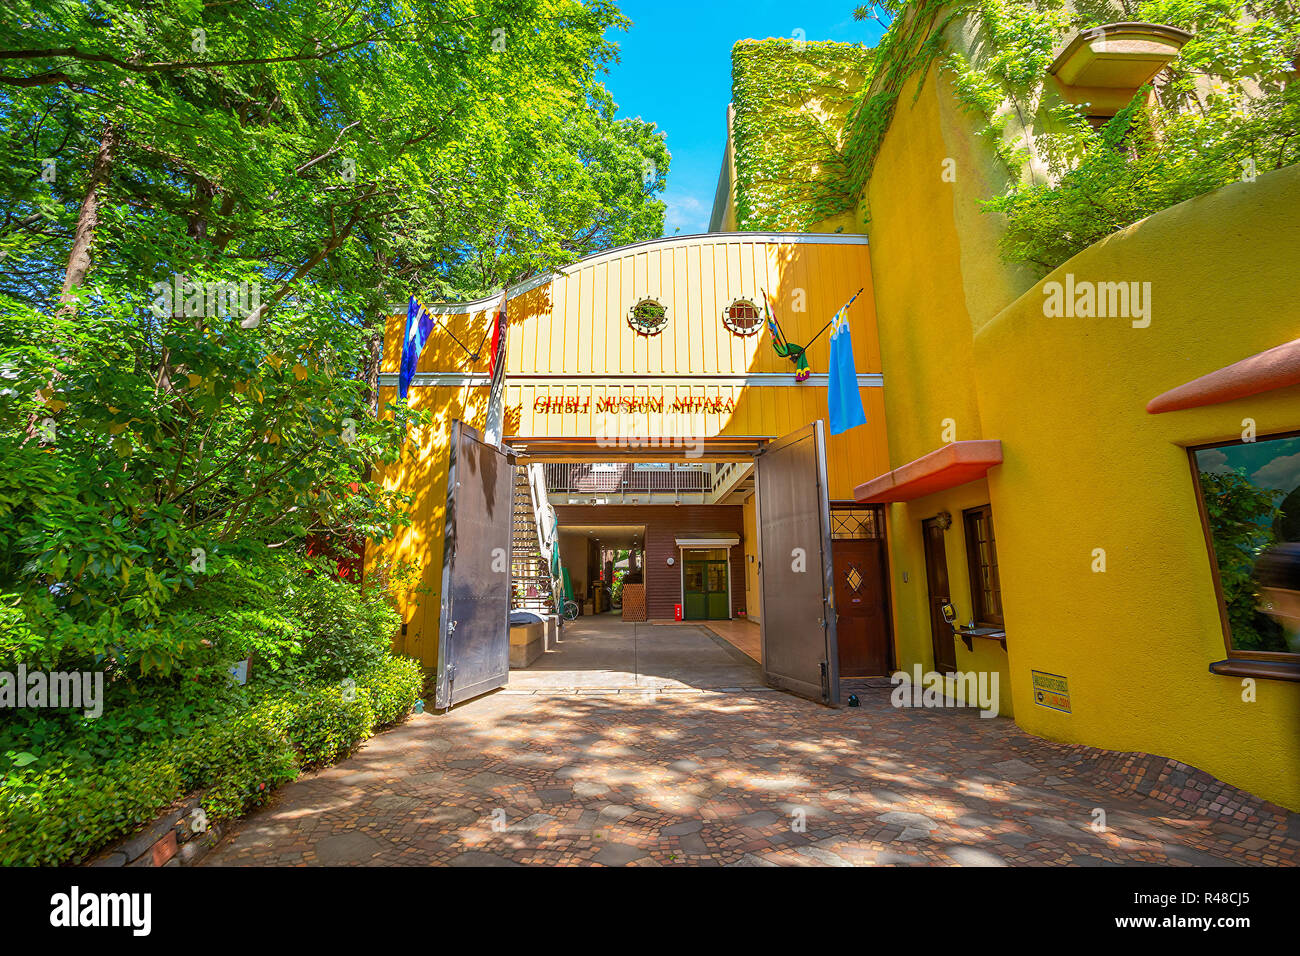 Tokyo, Japan - April 29 2018: Ghibli museum is a place that shows the work  of Japanese animation Studio Ghibli, features of children, technology and f  Stock Photo - Alamy